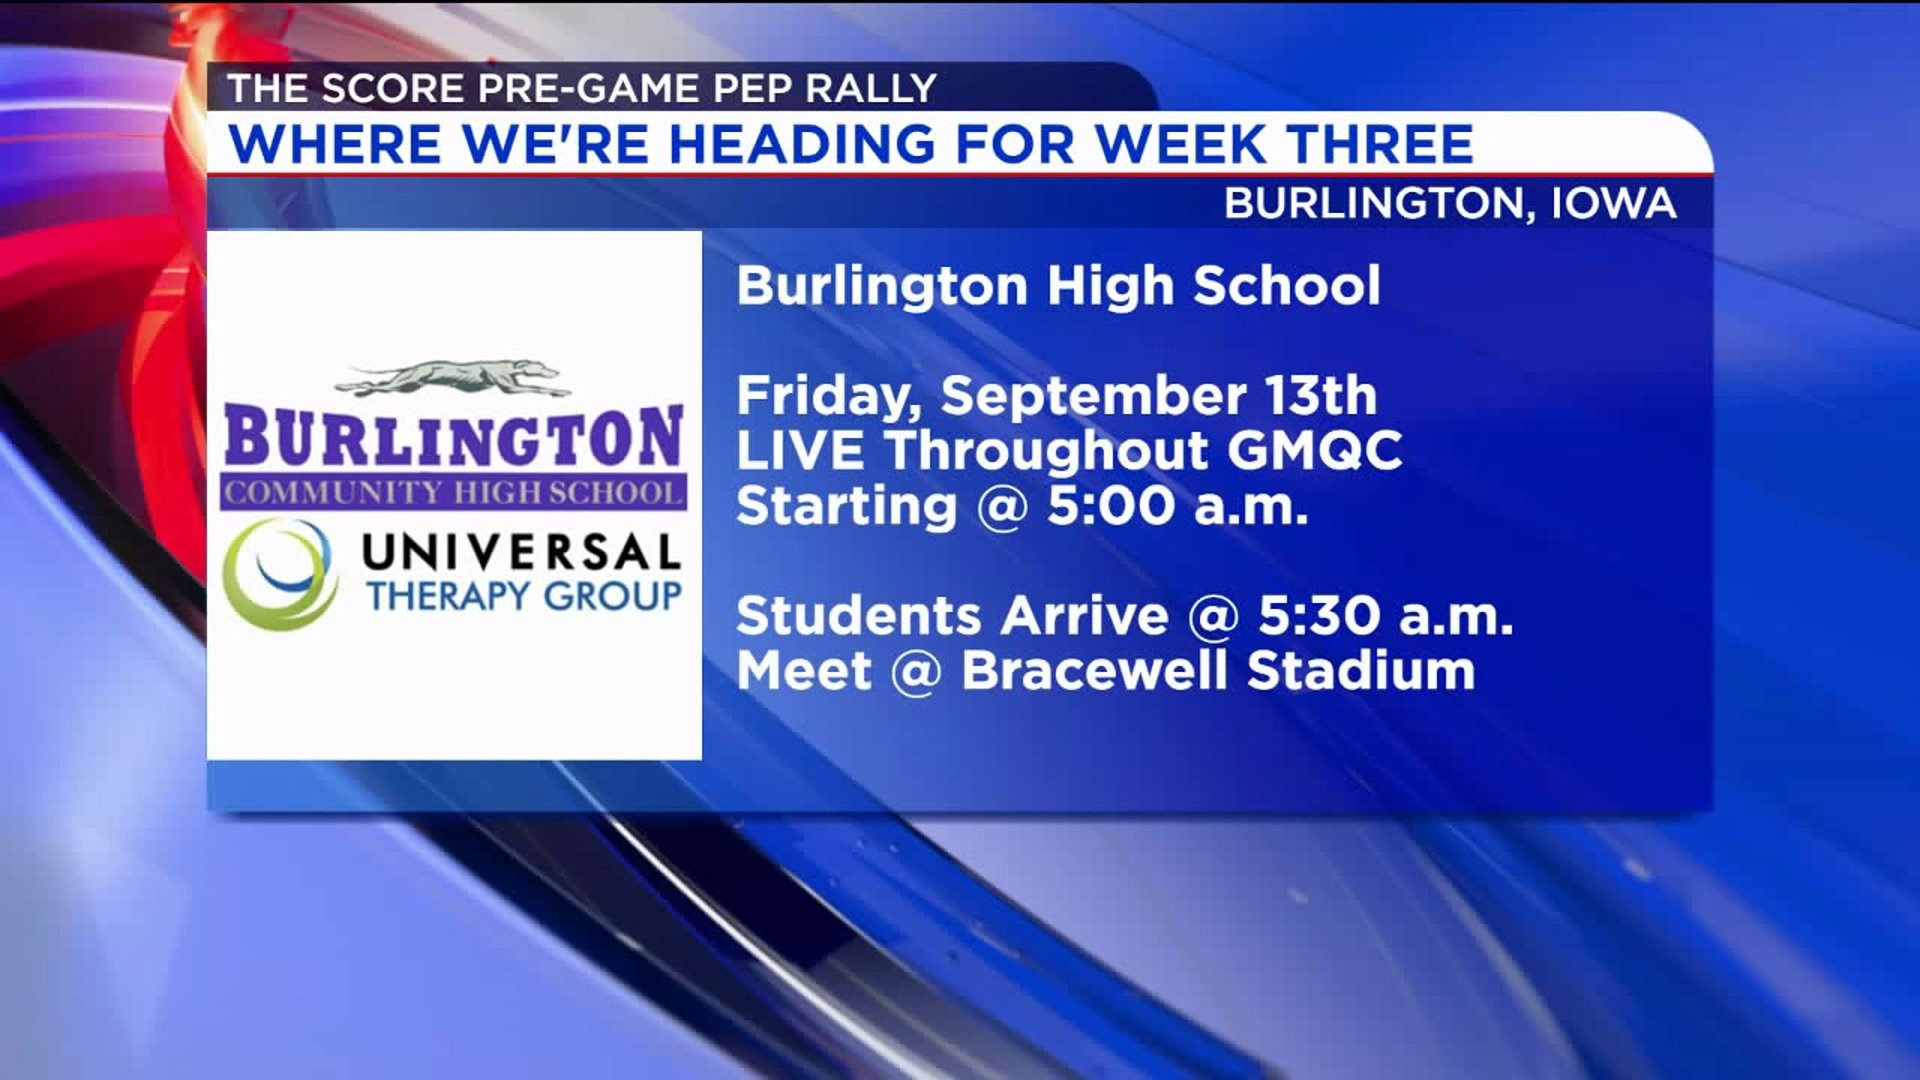 Where We`re Going for Week 3 of The Score Pre-Game Pep Rally